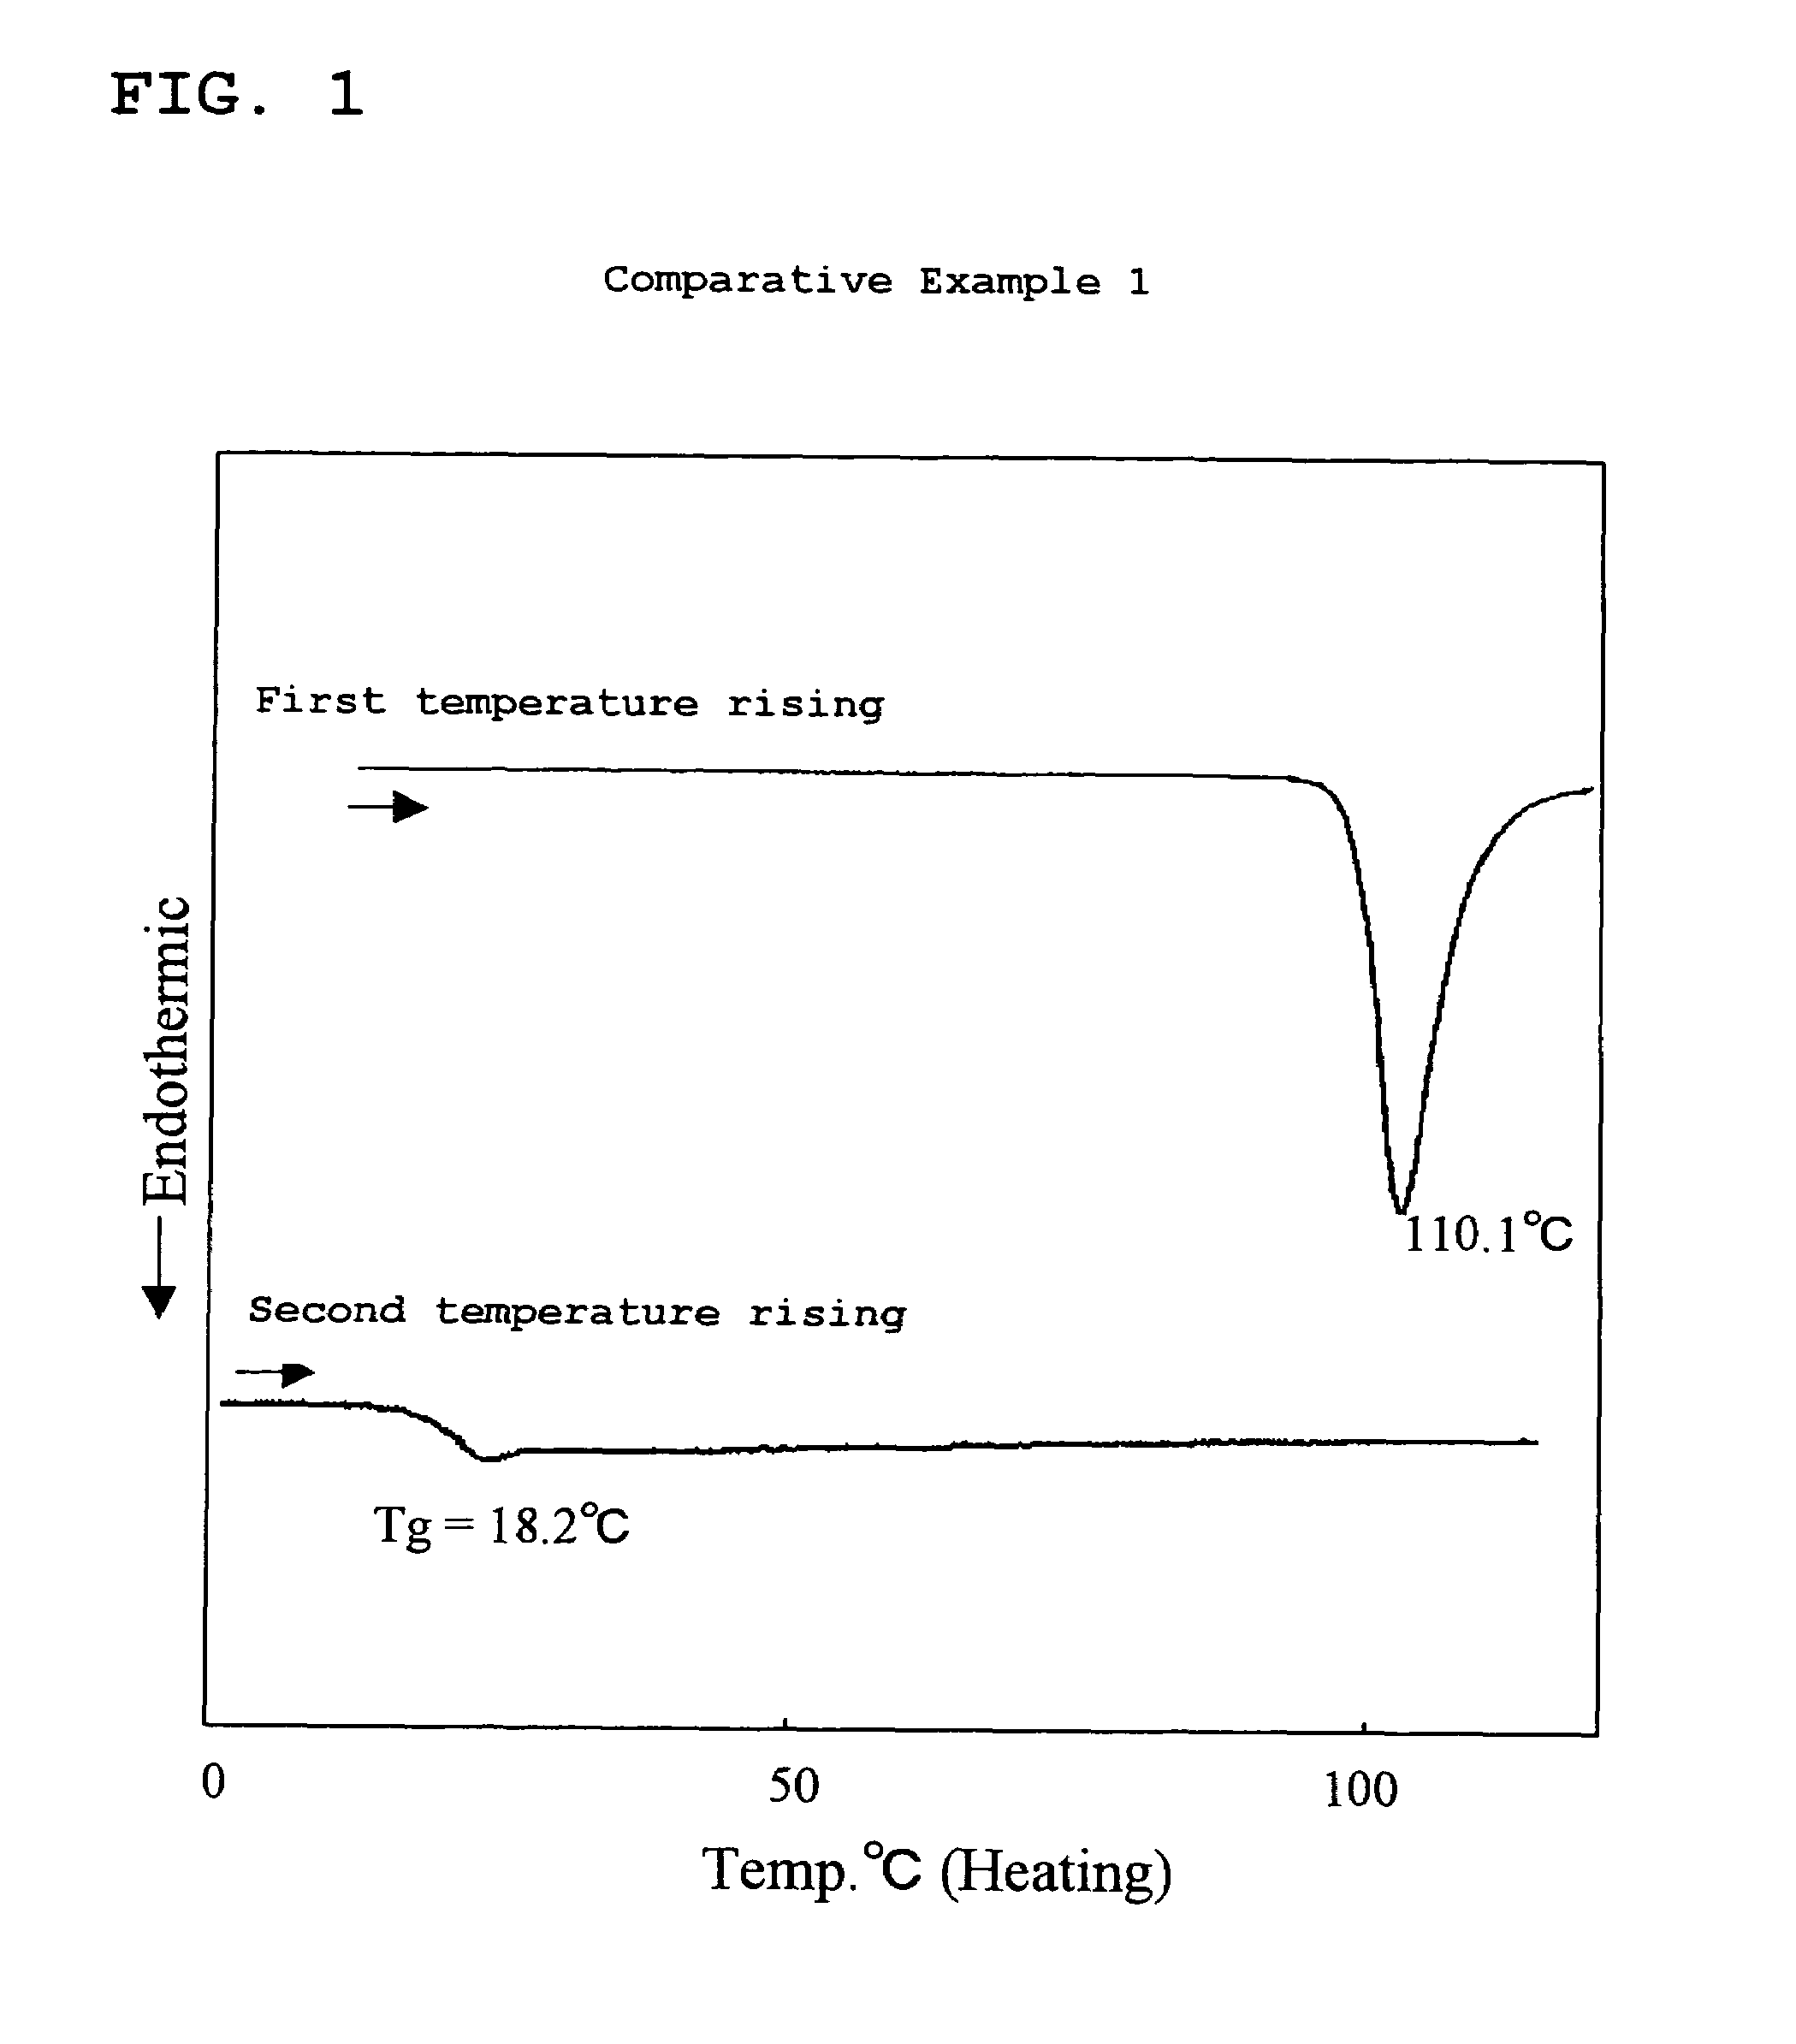 Amine compound having fluorene group as framework, process for producing the amine compound, and use of the amine compound